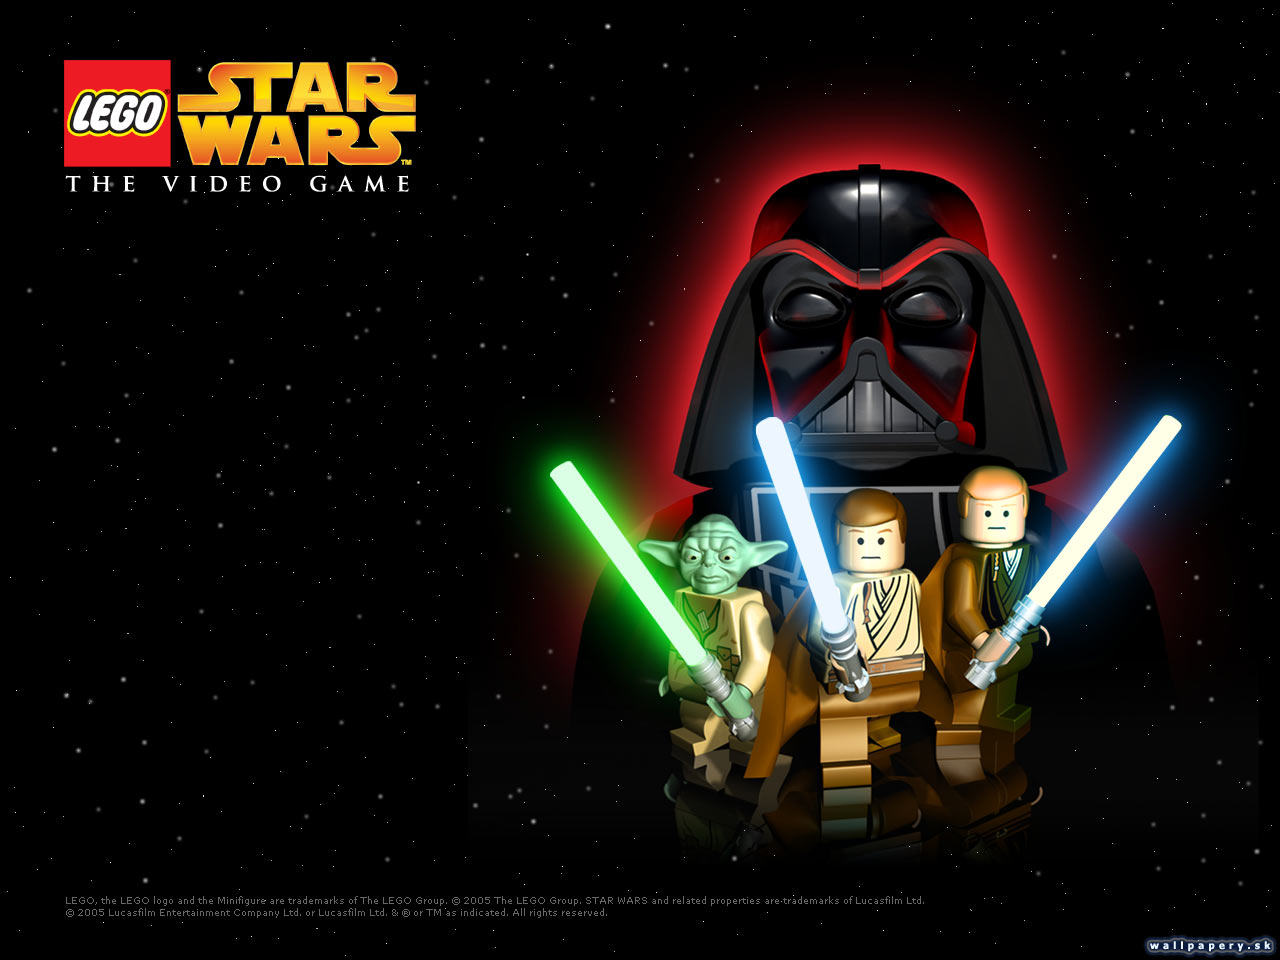 LEGO Star Wars: The Video Game - wallpaper 2